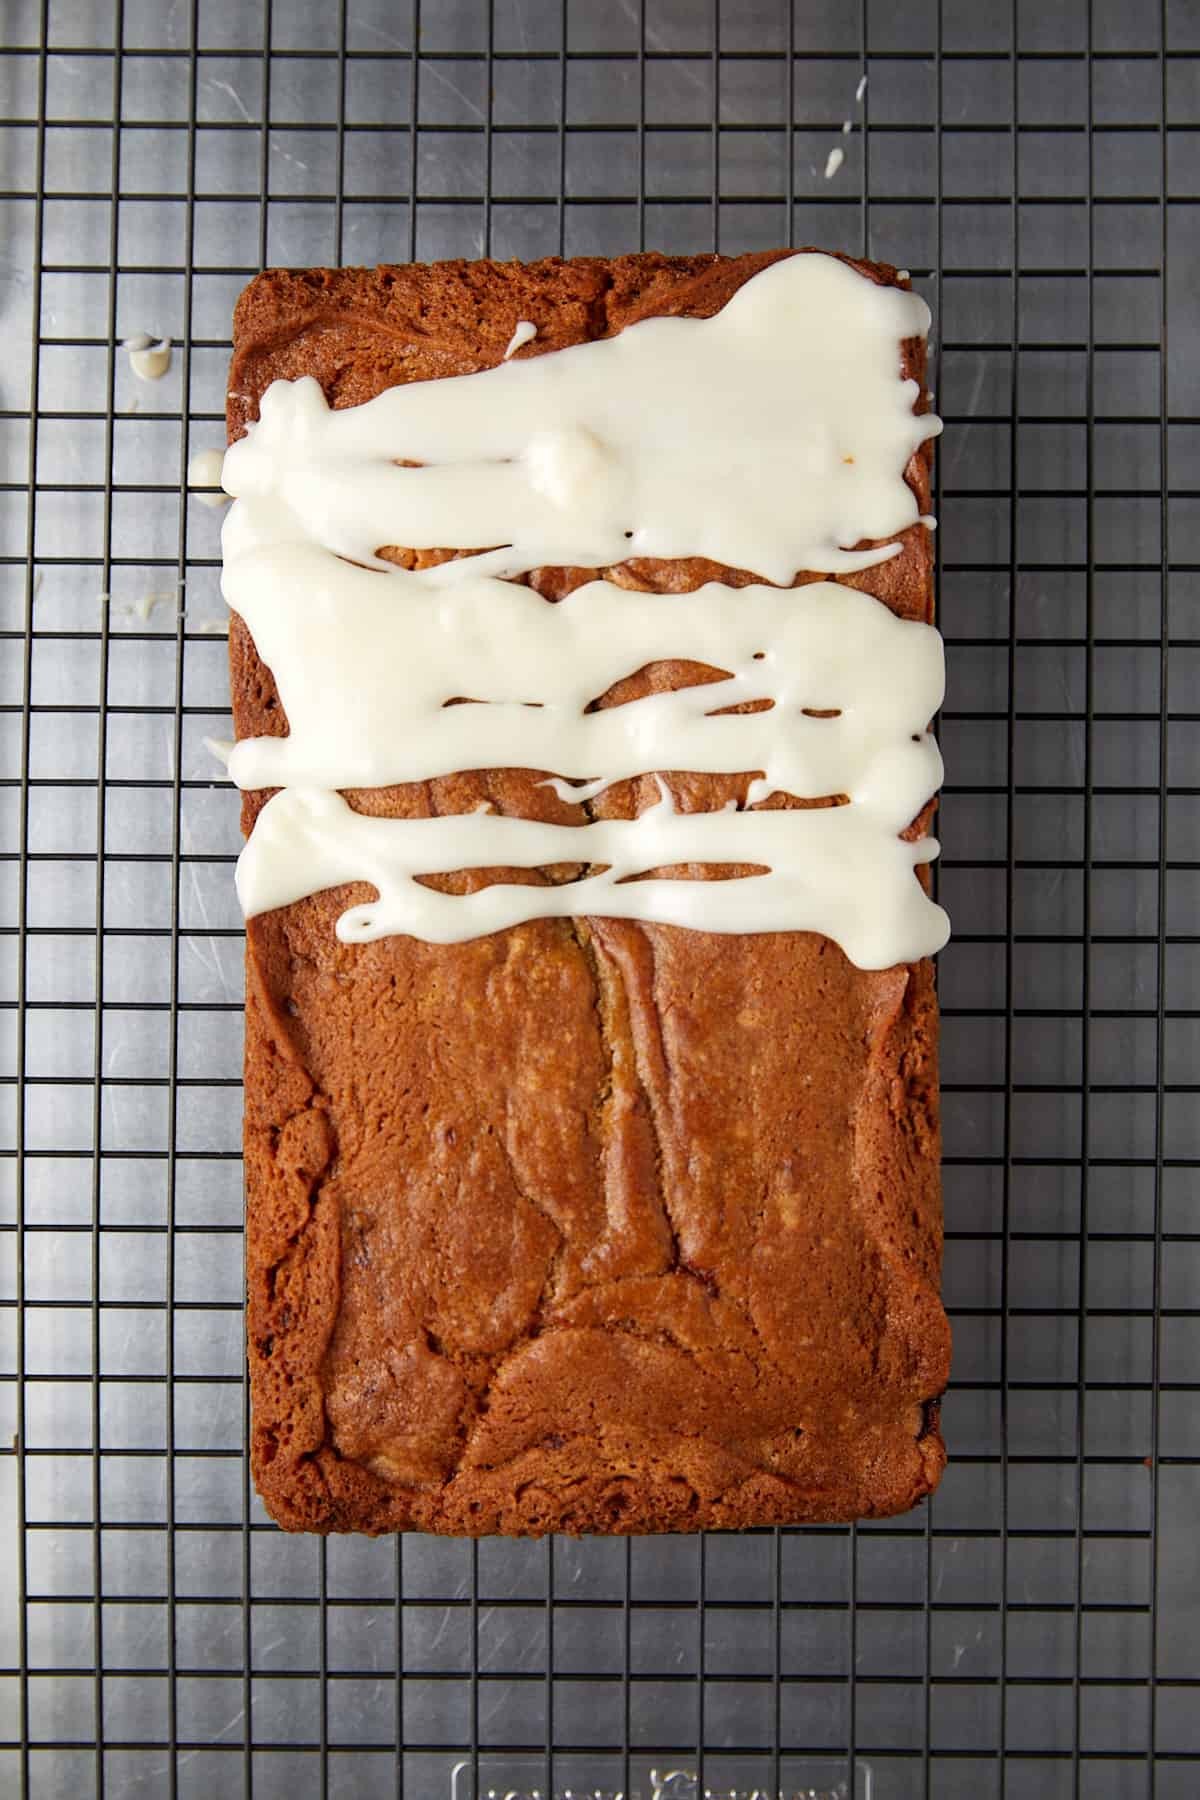 The image displays the raspberry white chocolate loaf cake with a rich, brown crust, presented on a wire cooling rack with a square grid pattern. The cake has a thick layer of white icing drizzled over the top, covering approximately half of its surface. The icing is uneven, with some areas thicker than others, creating an artistic, homemade appearance. The backdrop is a neutral gray, which might be a countertop, highlighting the contrast between the cake's warm tones and the icing's creamy white color.





